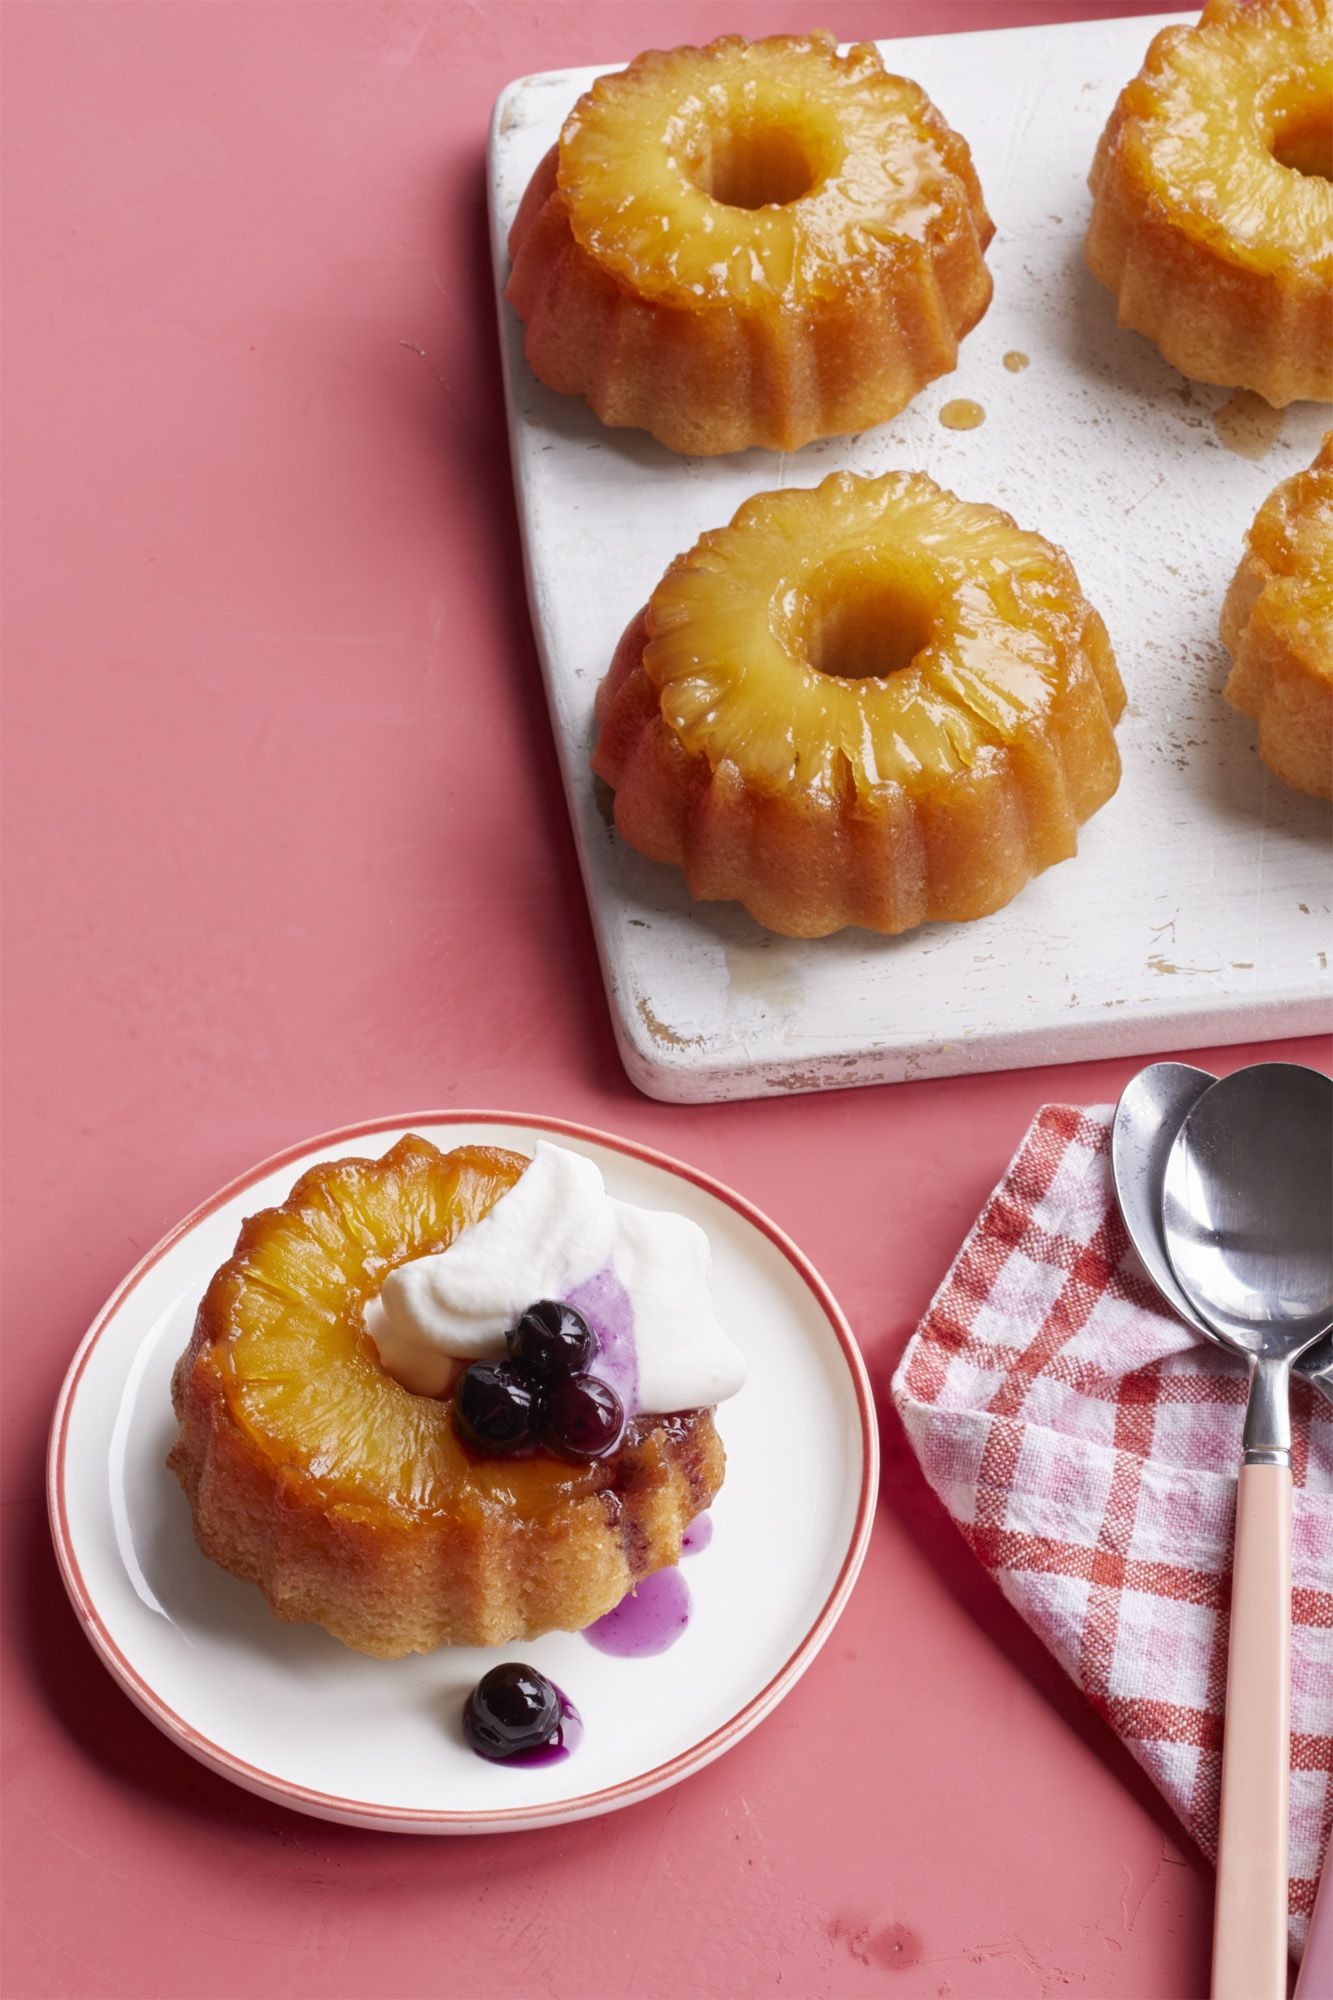 Quick Pineapple Upside-Down Cake - Recipes | Pampered Chef US Site